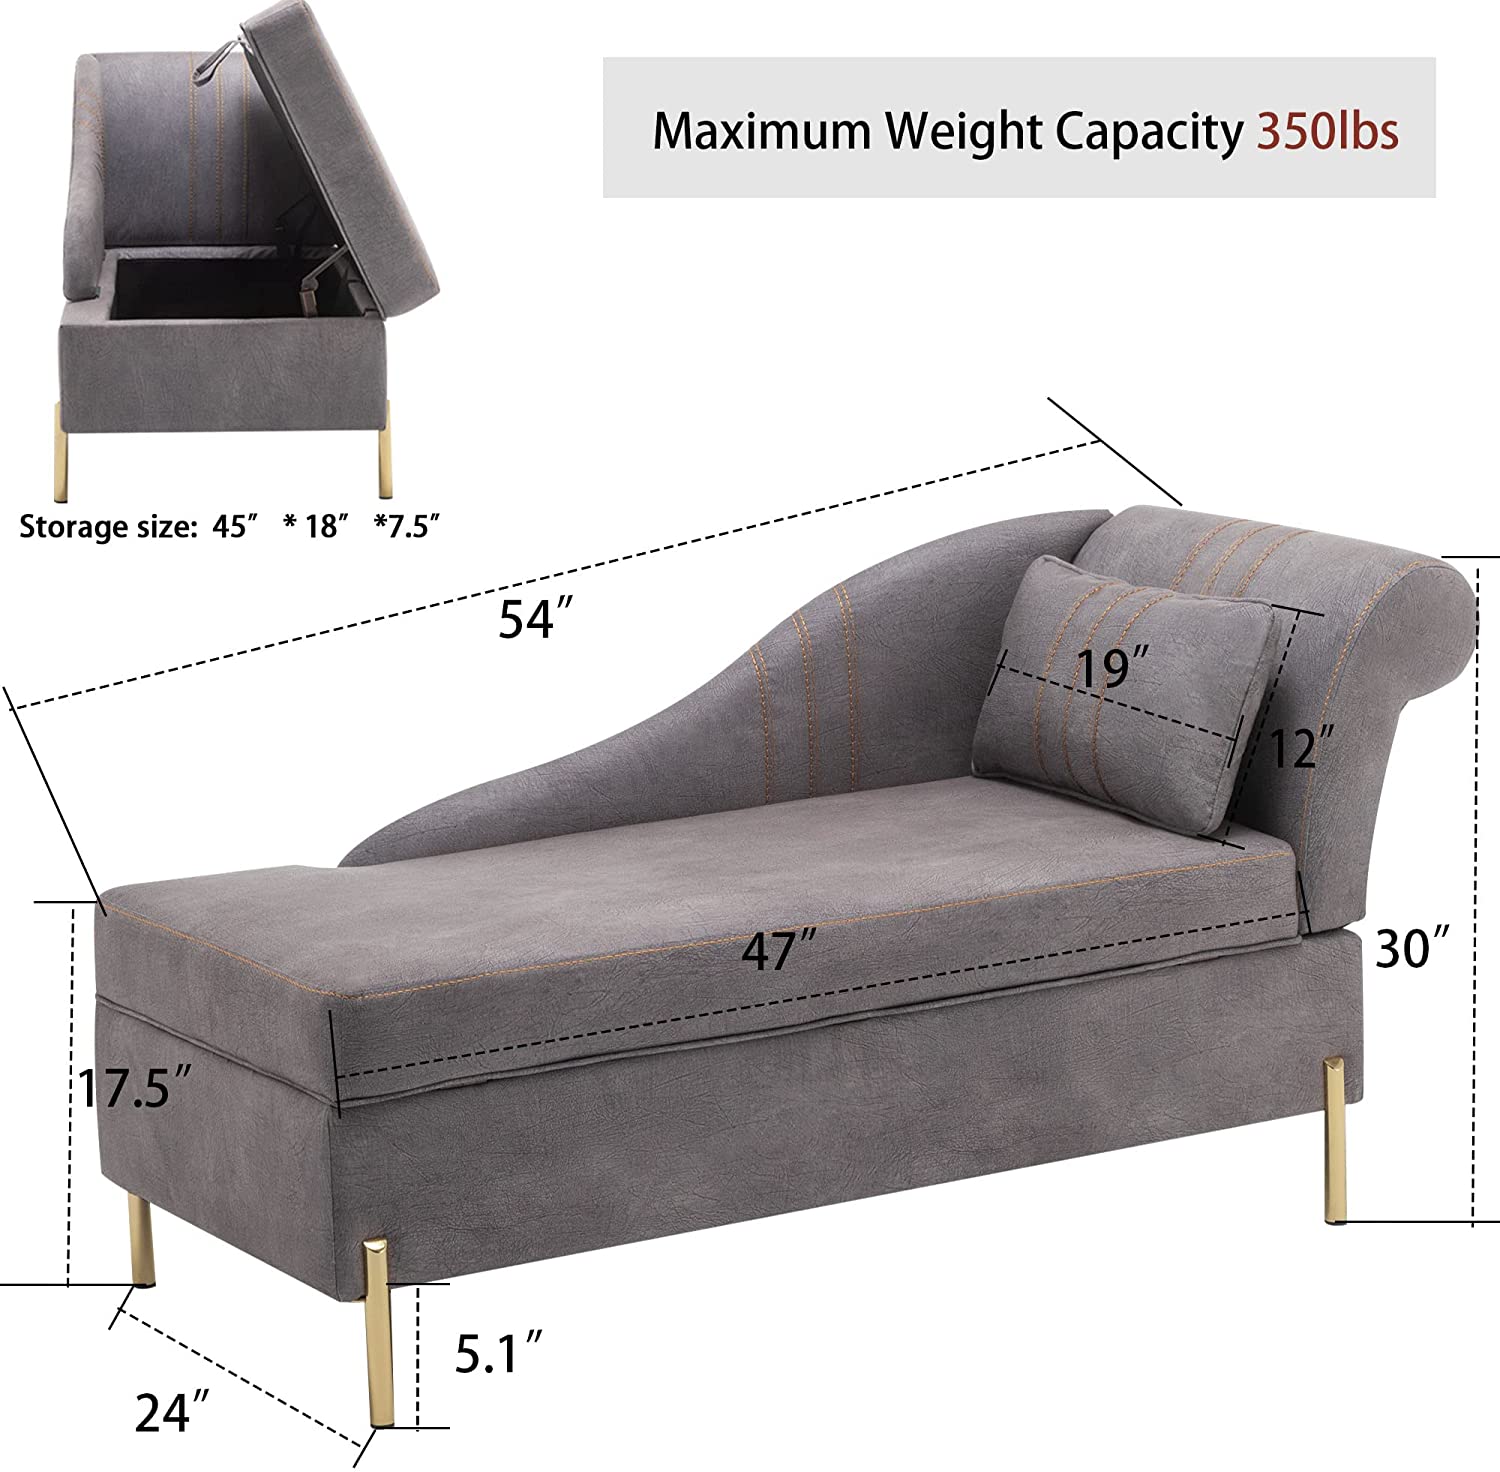 Andeworld Chaise Lounge with Storage, Modern Upholstered Tufted Chaise Lounge Chair Indoor Faux Suede Sofa Recliner Couch for Bedroom Office Living Room -Grey(Right Armrest) - image 3 of 7